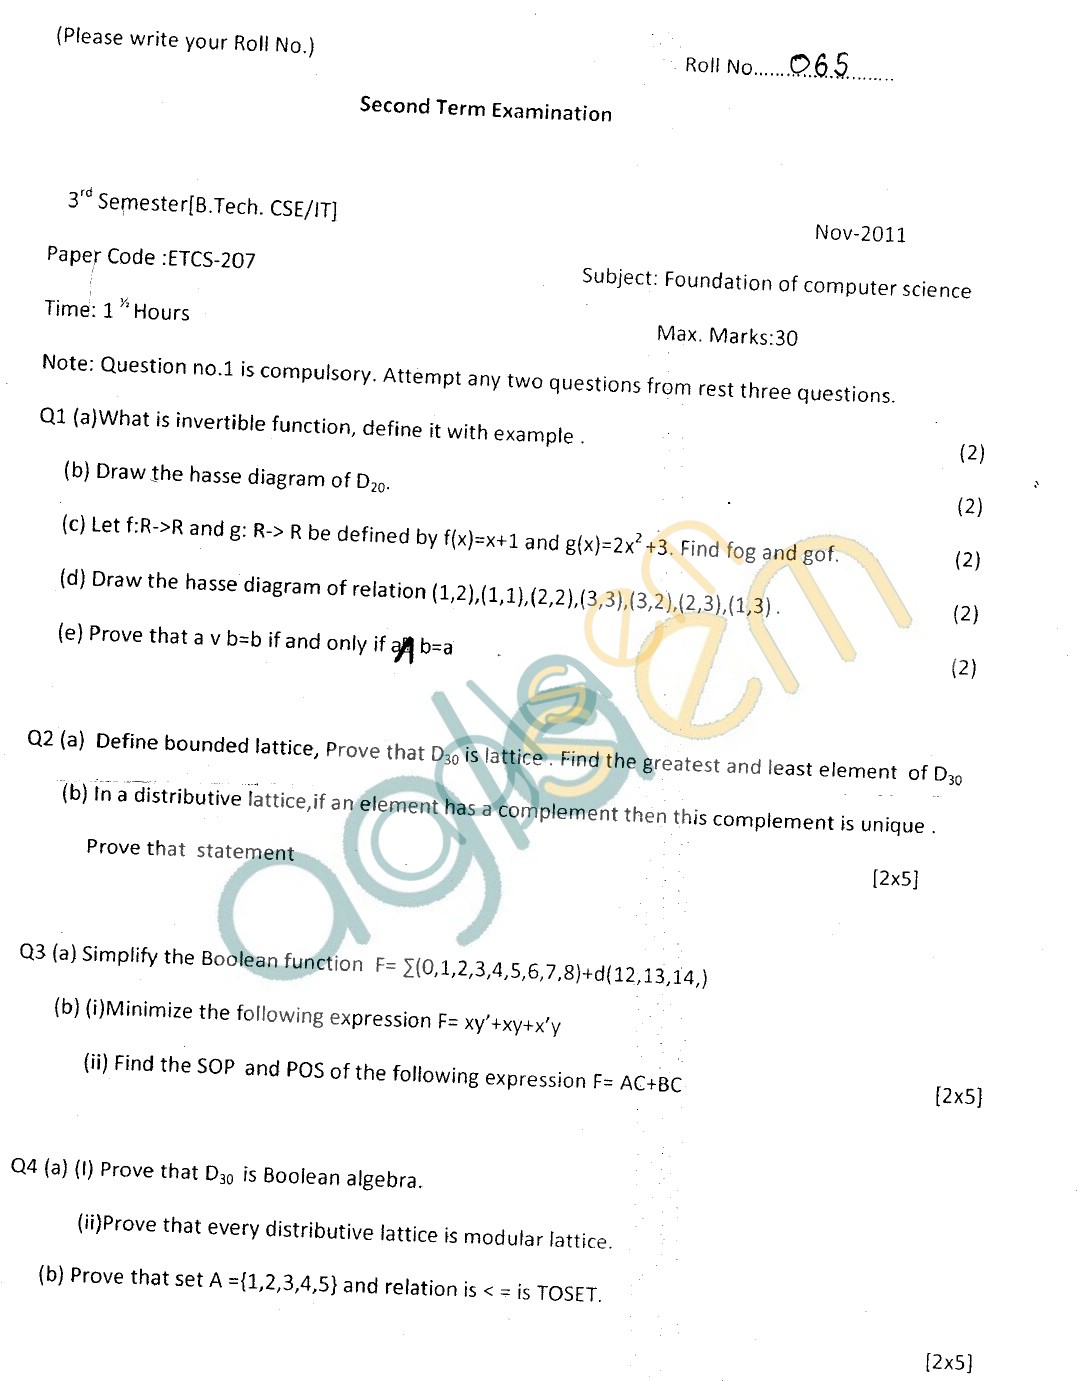 GGSIPU Question Papers Third Semester  Second Term 2011  ETCS-207